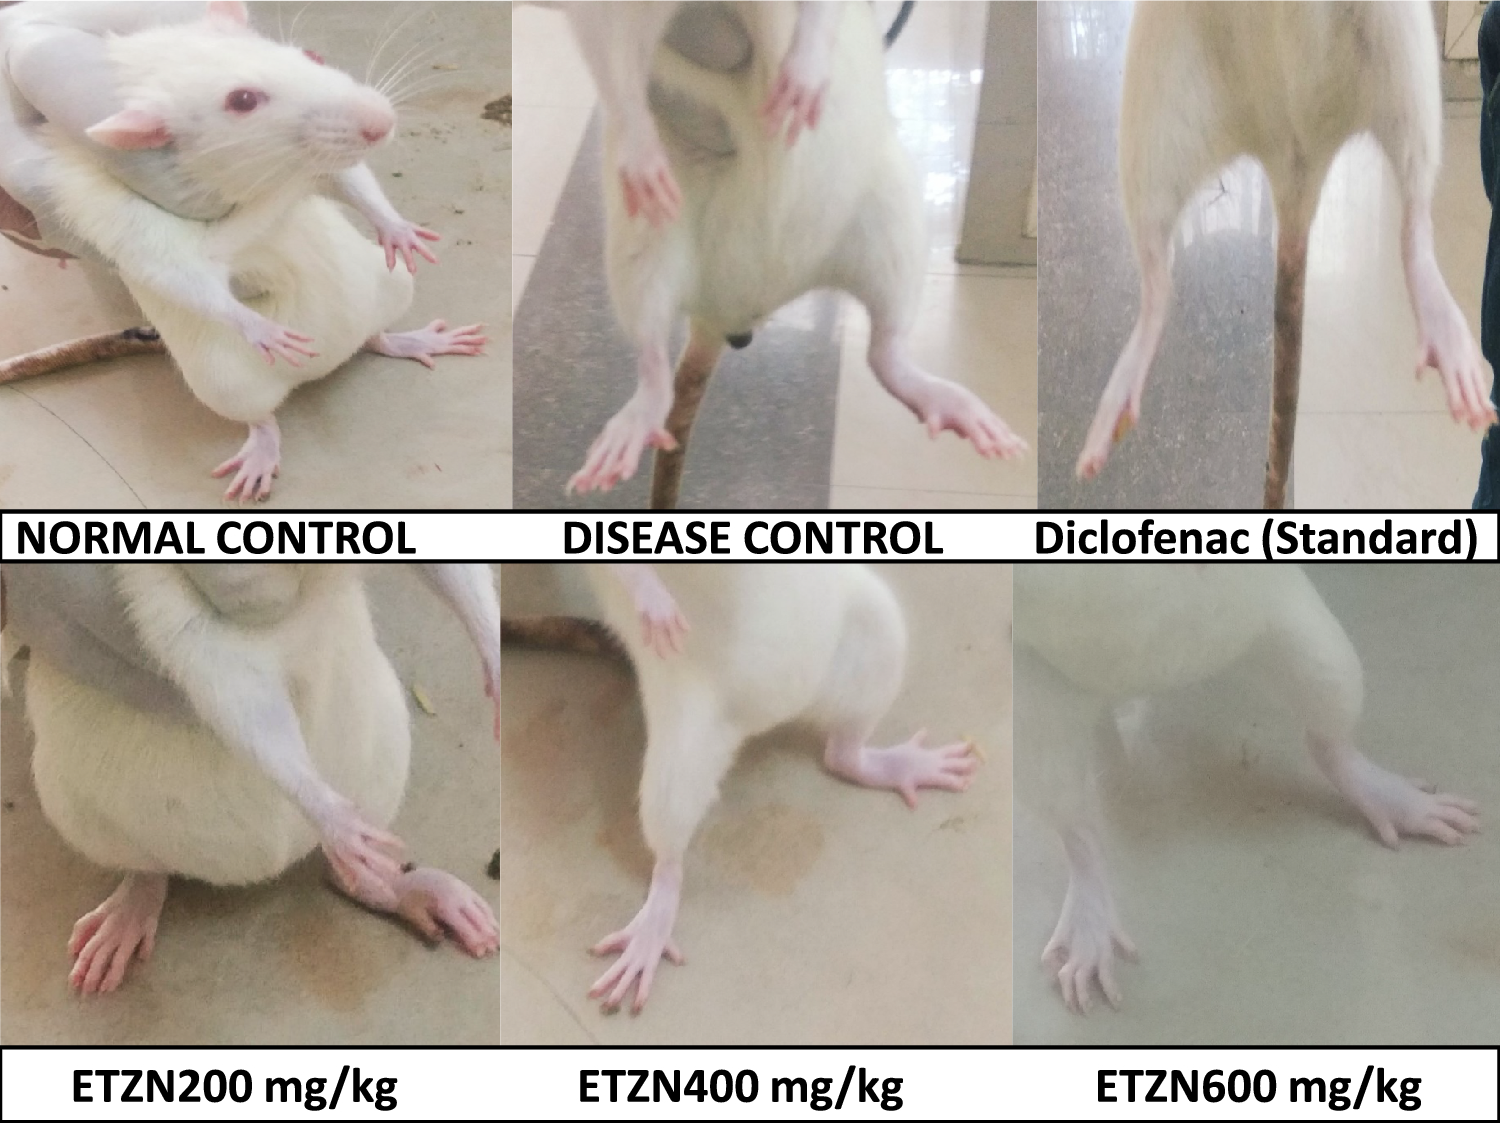 Ethanol extract of Ziziphus nummularia ameliorates formaldehyde-induced arthritis in rats by regulating oxidative stress biomarkers and haematological profile